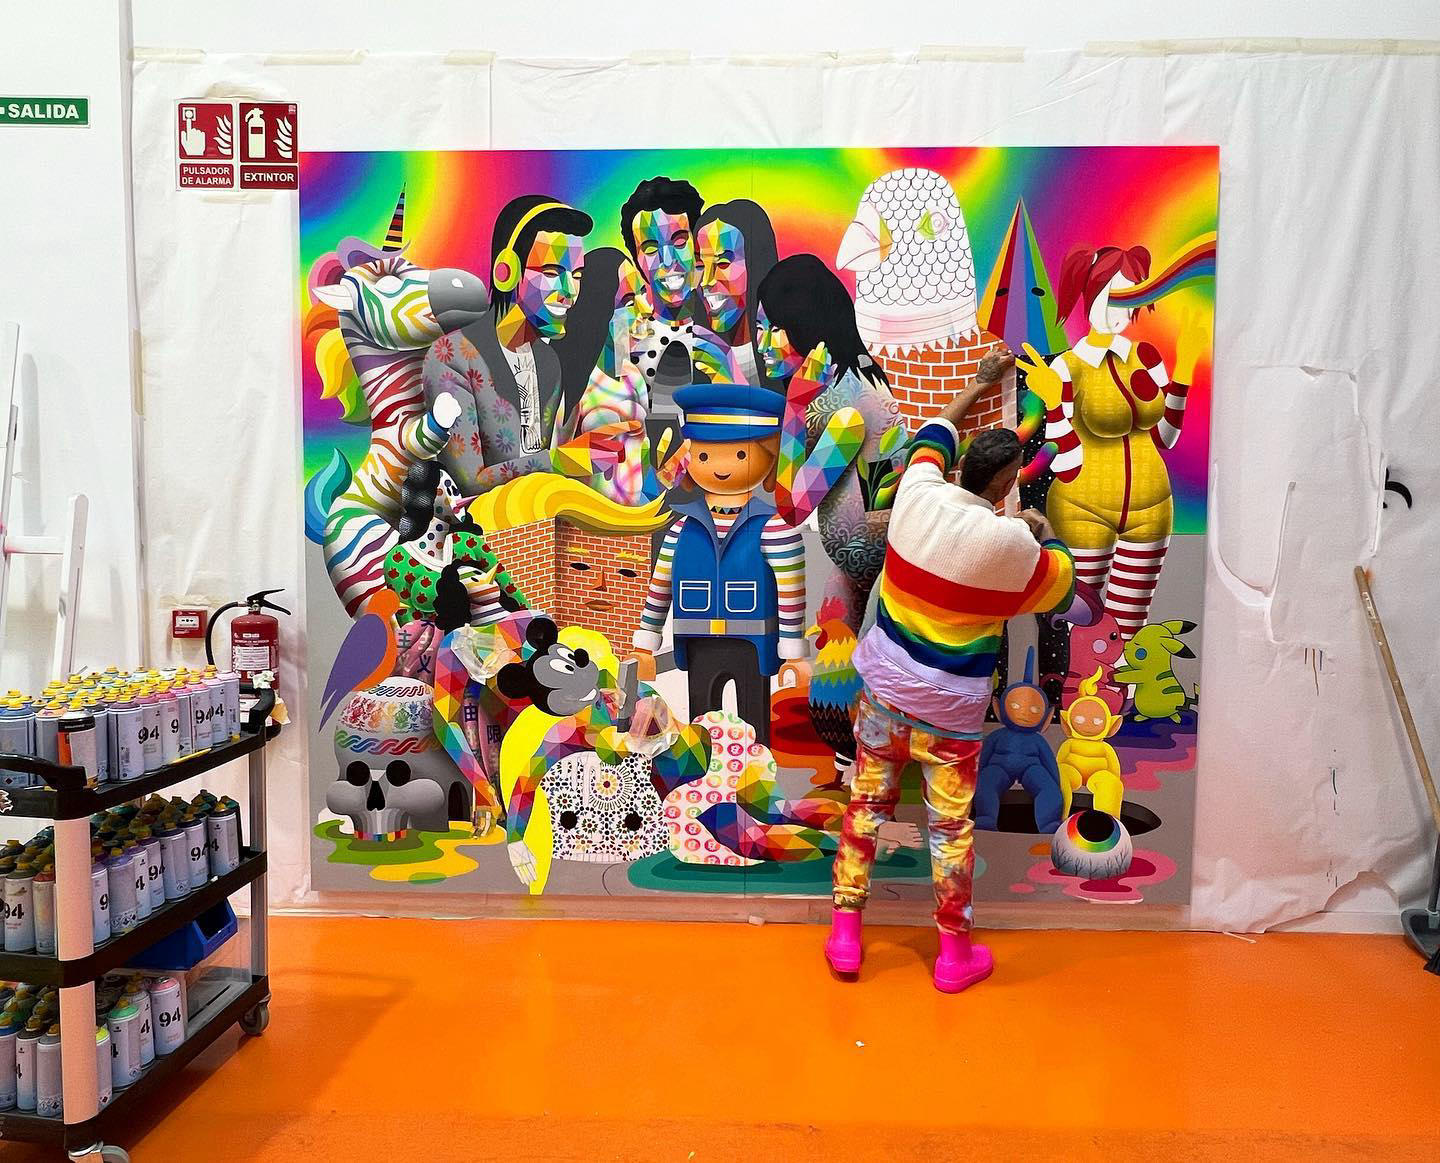 image  1 OKUDA SAN MIGUEL - Last day of the year working in the studio